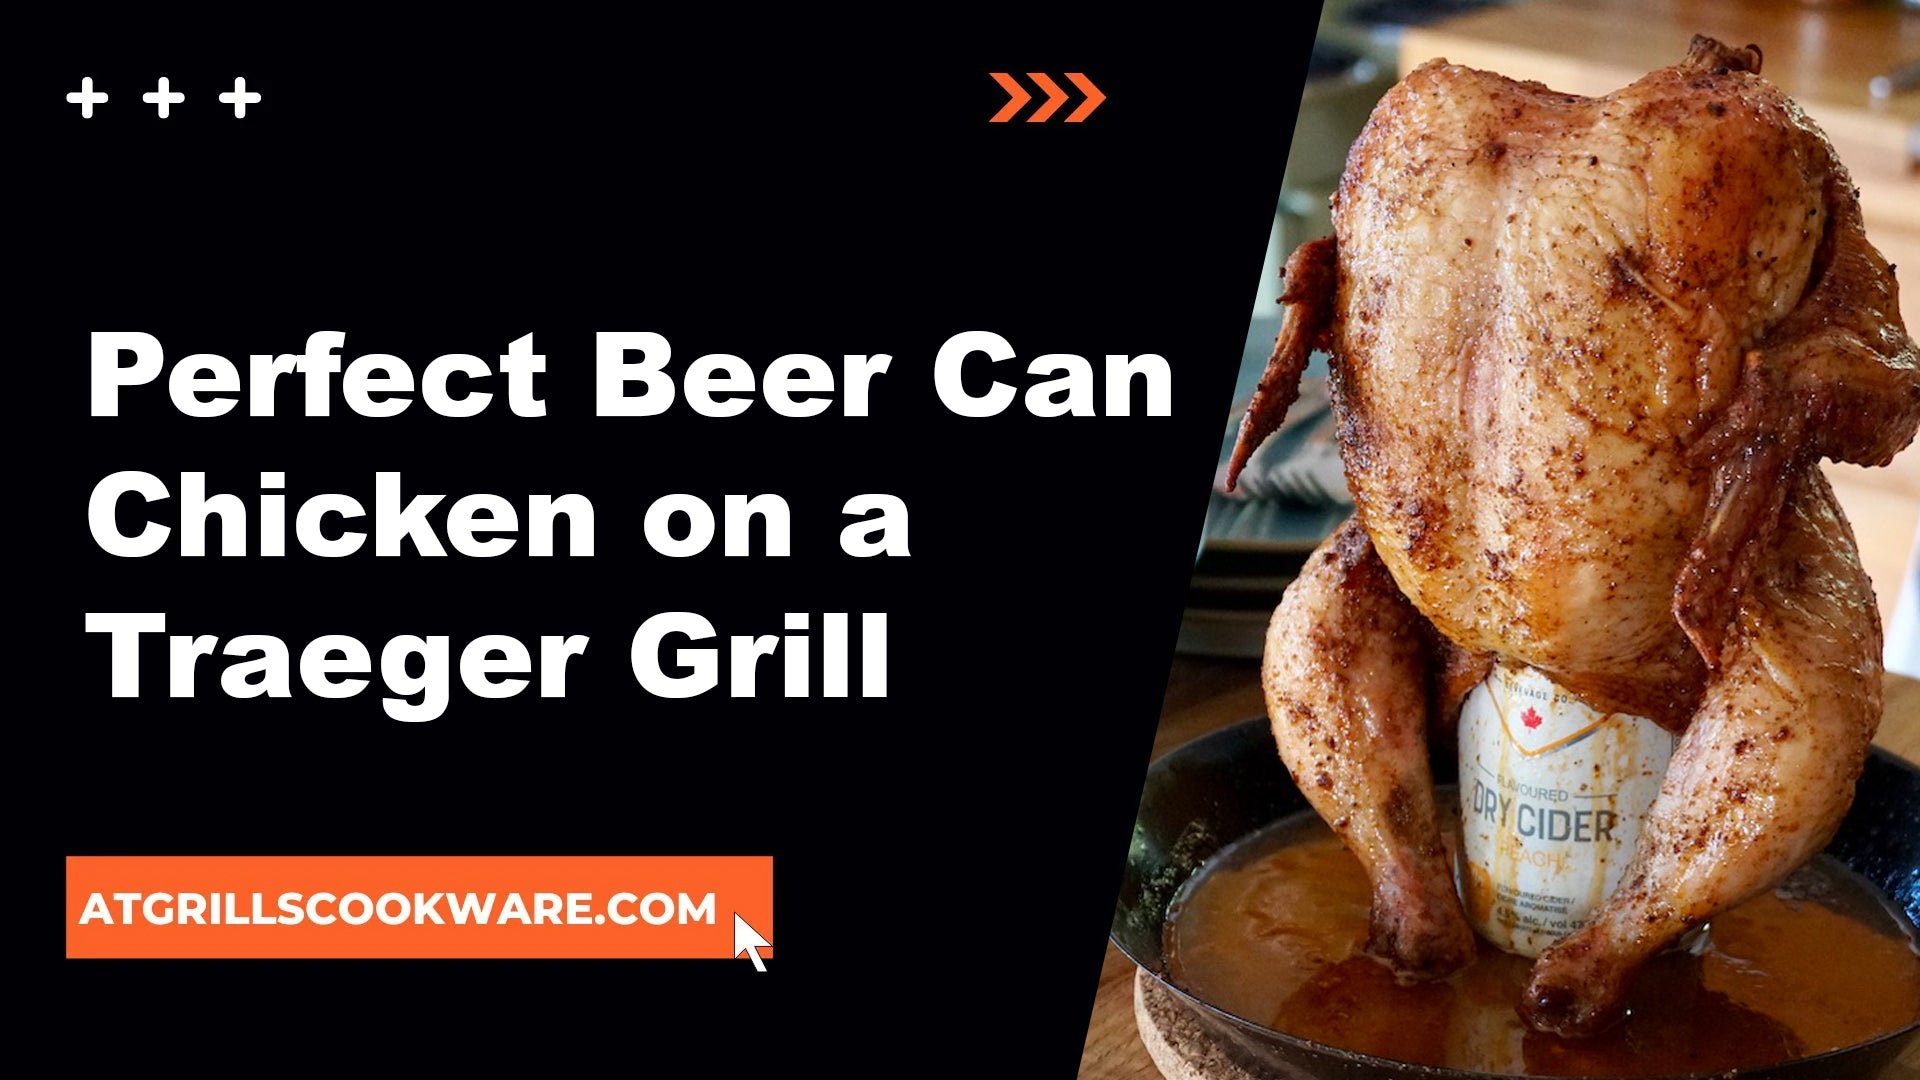 Perfect Beer Can Chicken on a Traeger Grill